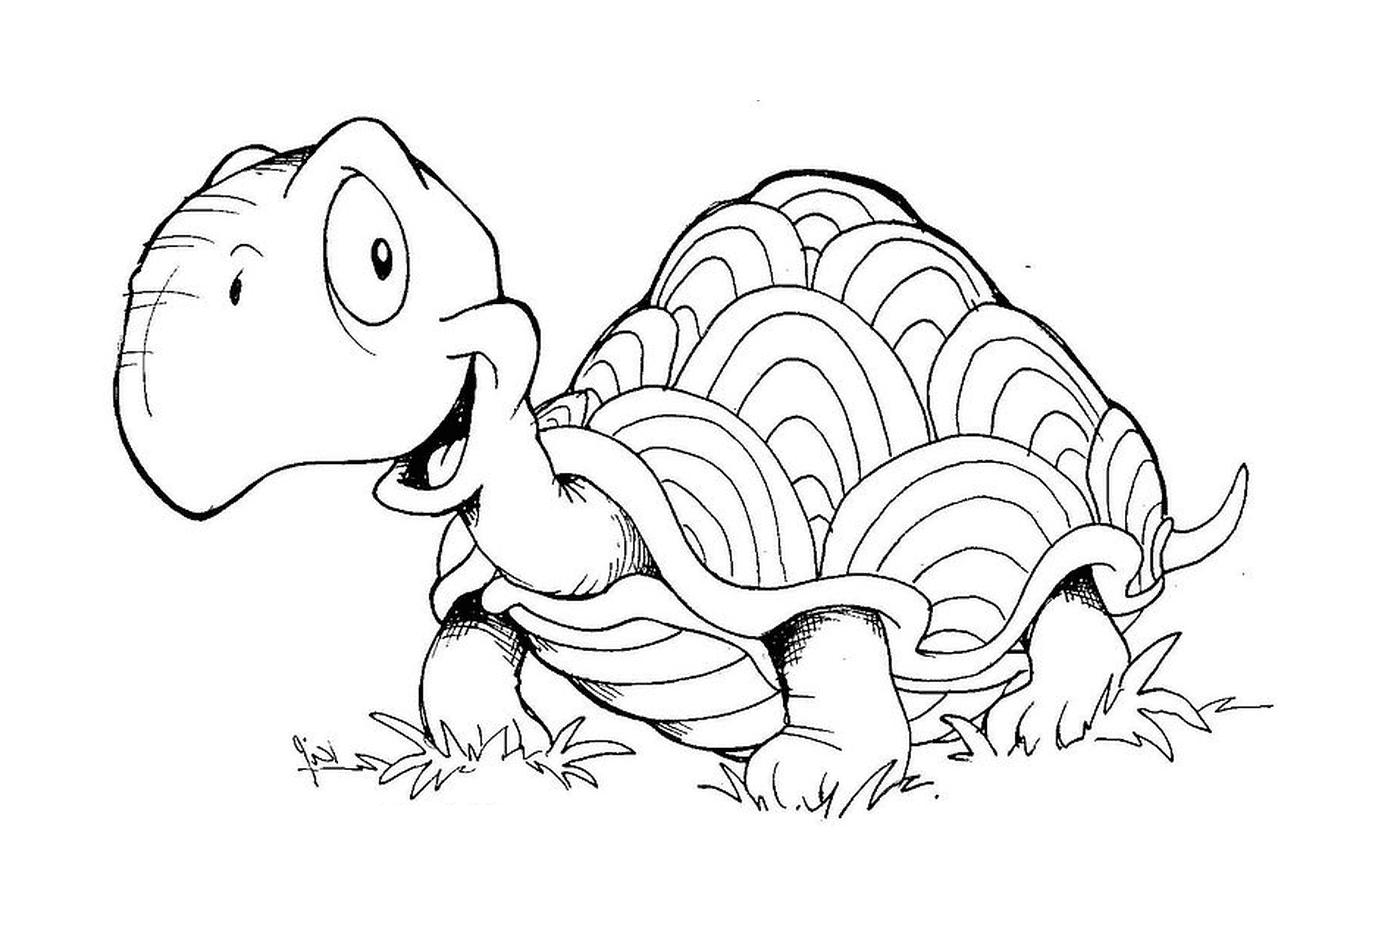  A turtle in the grass 